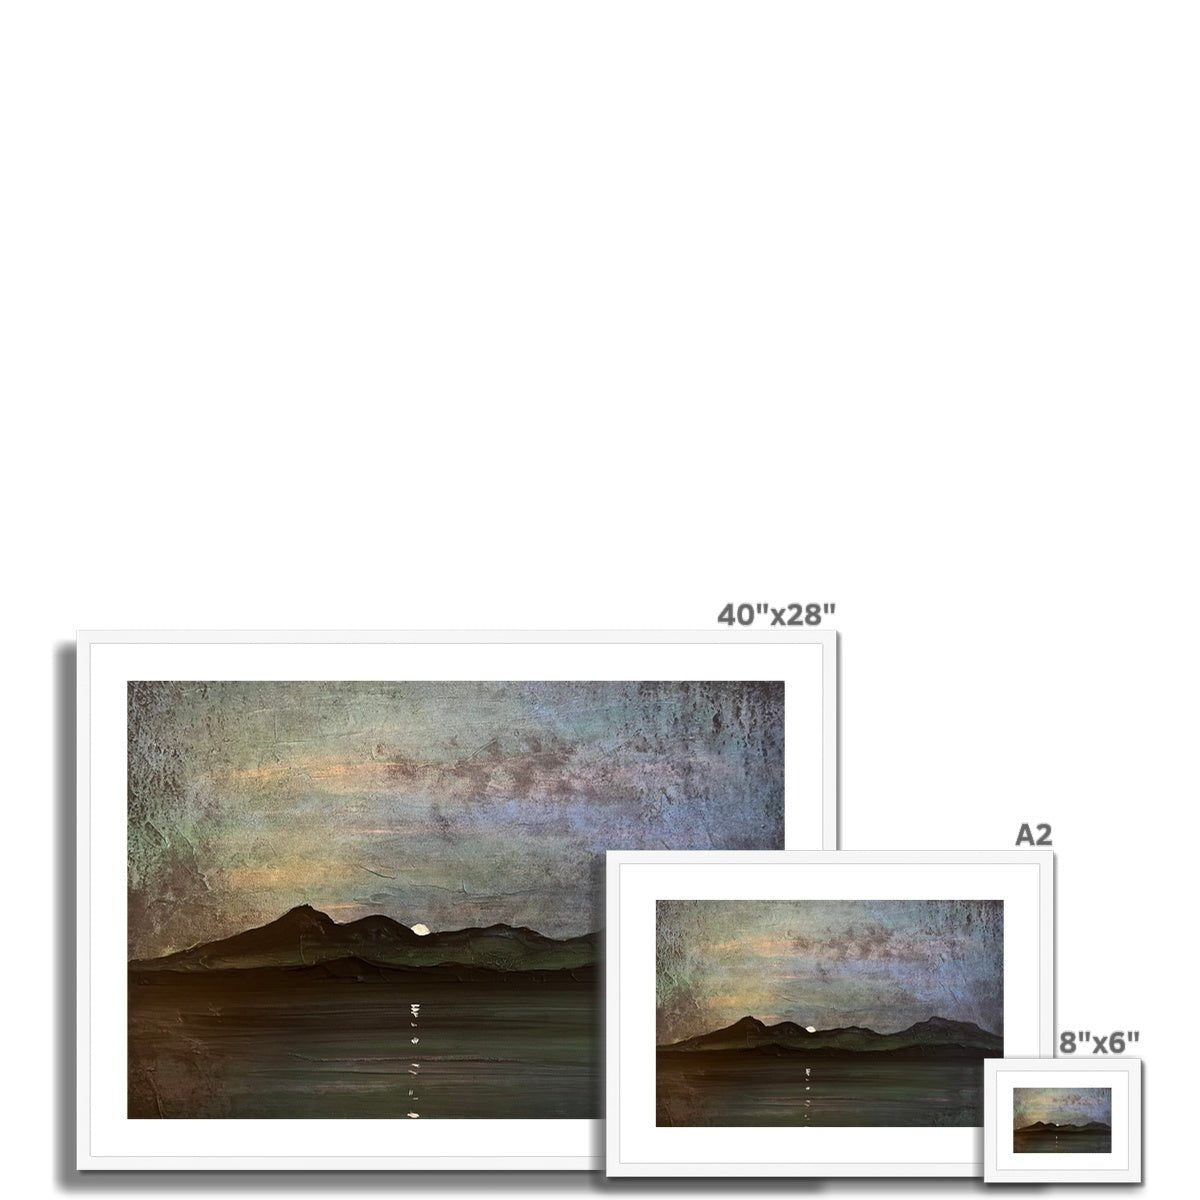 Sleeping Warrior Moonlight Arran Painting | Framed & Mounted Prints From Scotland-Framed & Mounted Prints-Arran Art Gallery-Paintings, Prints, Homeware, Art Gifts From Scotland By Scottish Artist Kevin Hunter